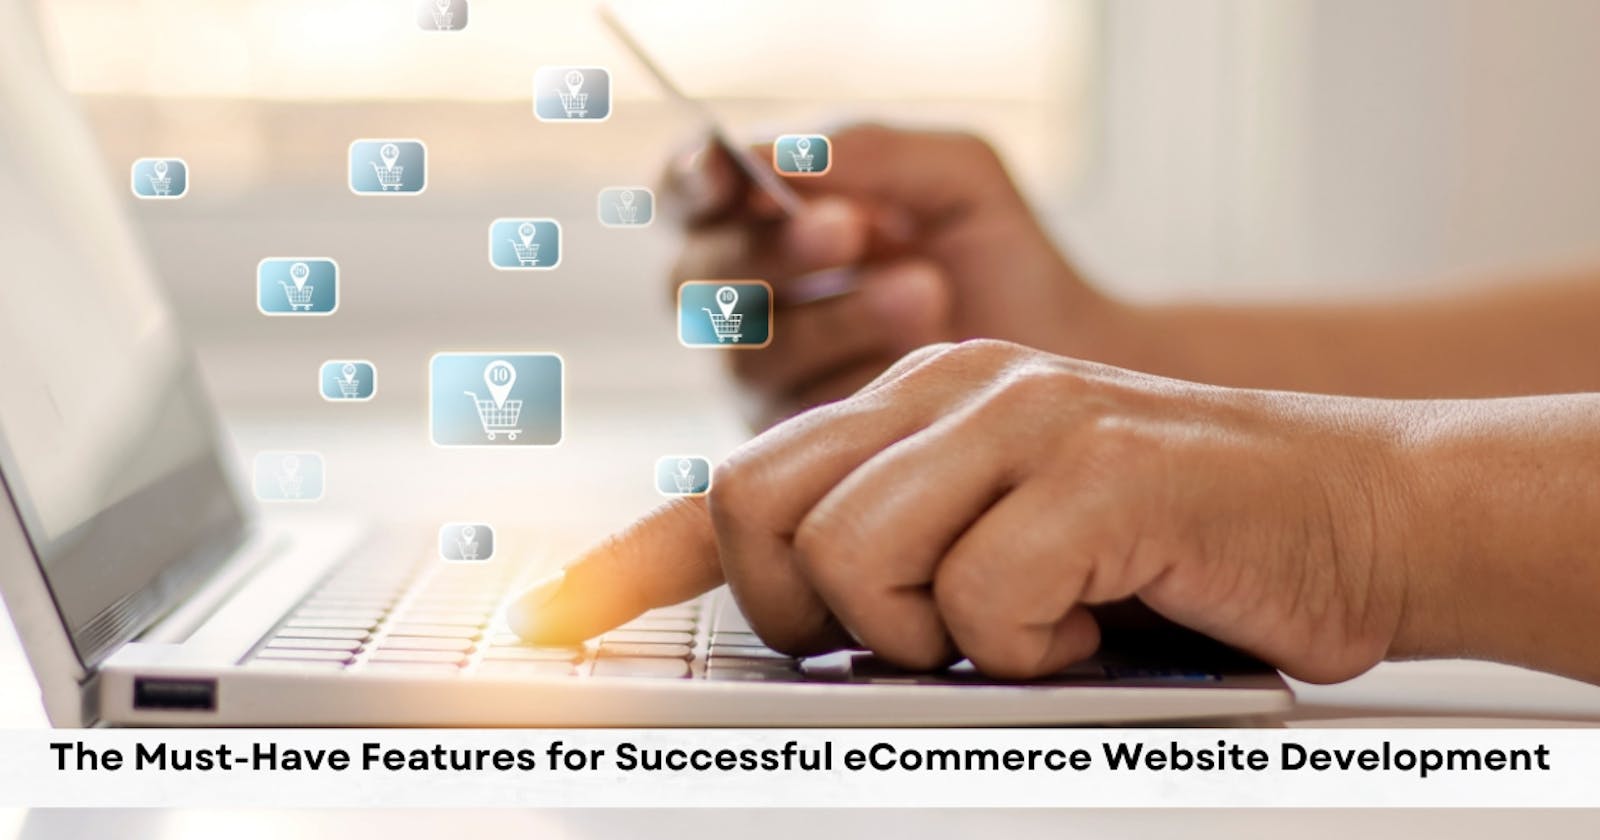 The Must-Have Features for Successful eCommerce Website Development